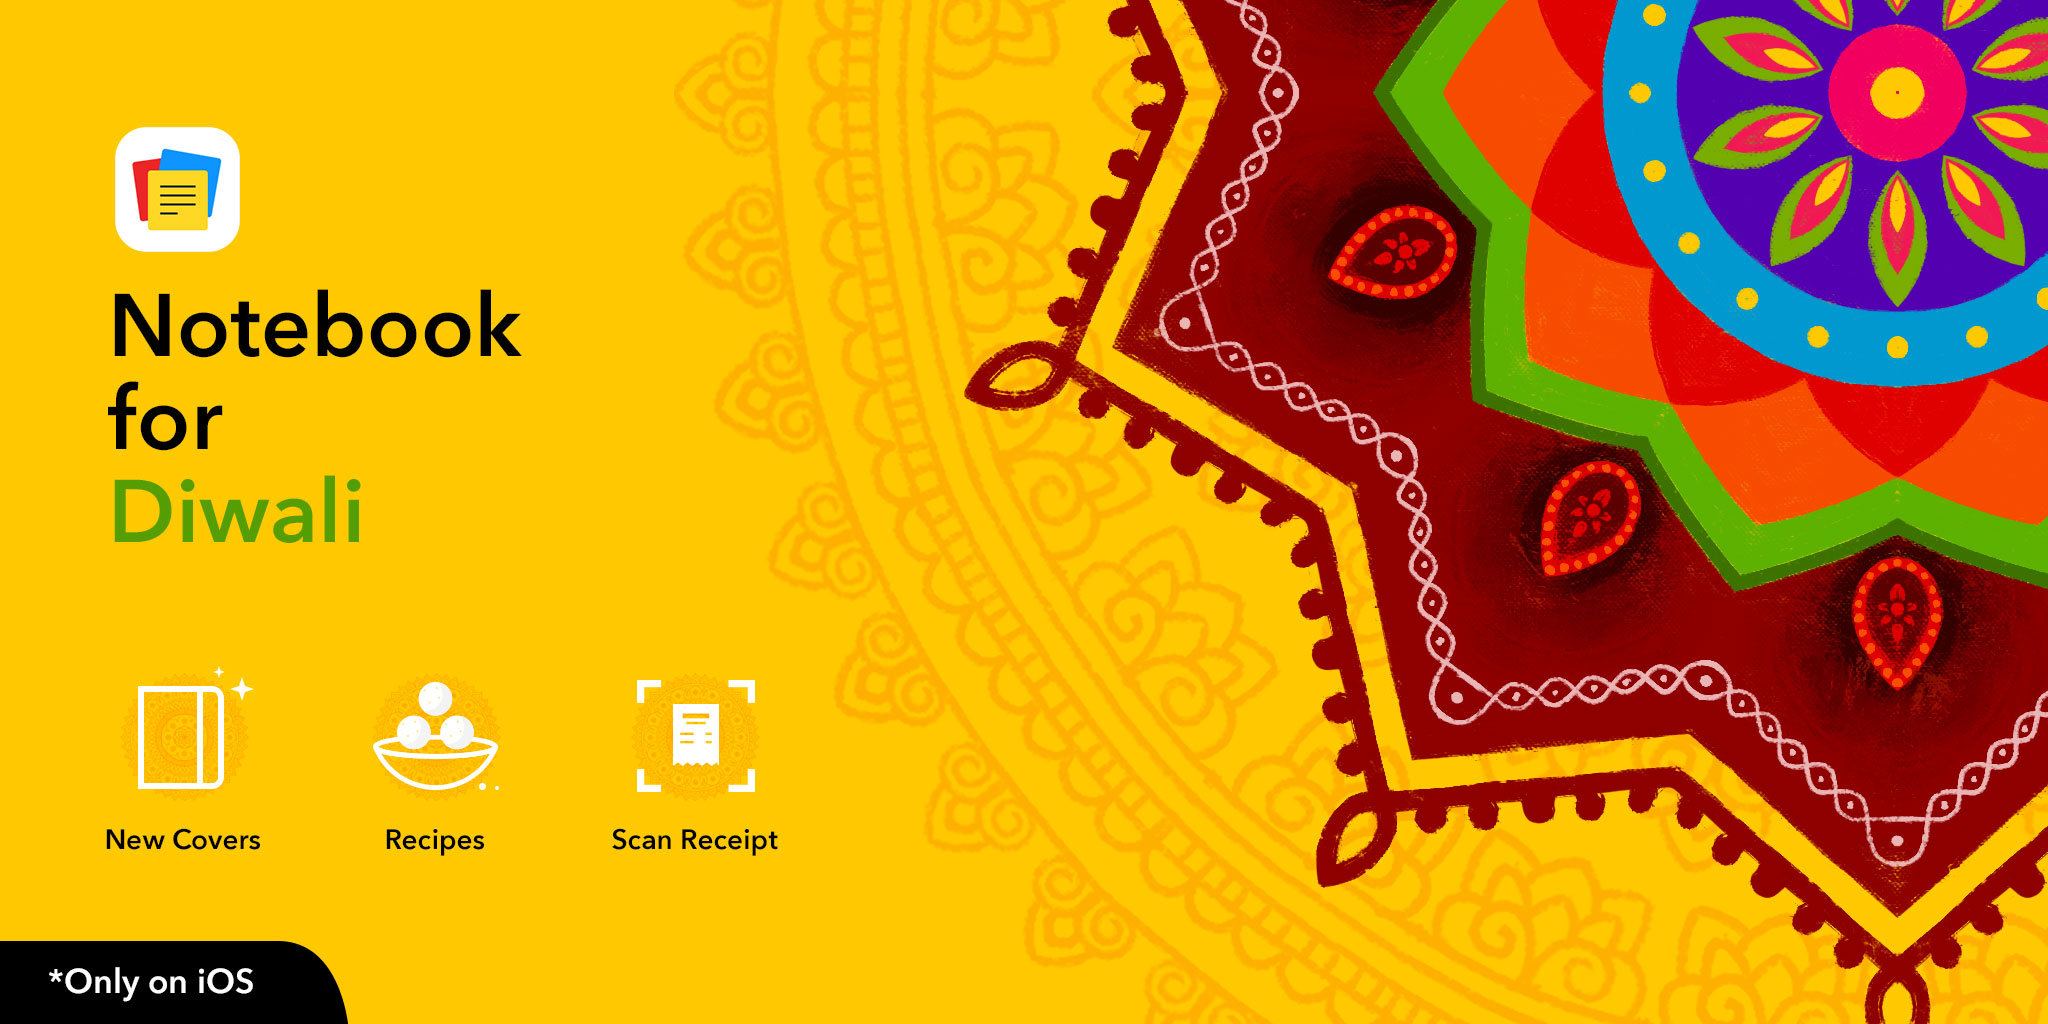 Notebook for iOS: Diwali Edition is here.